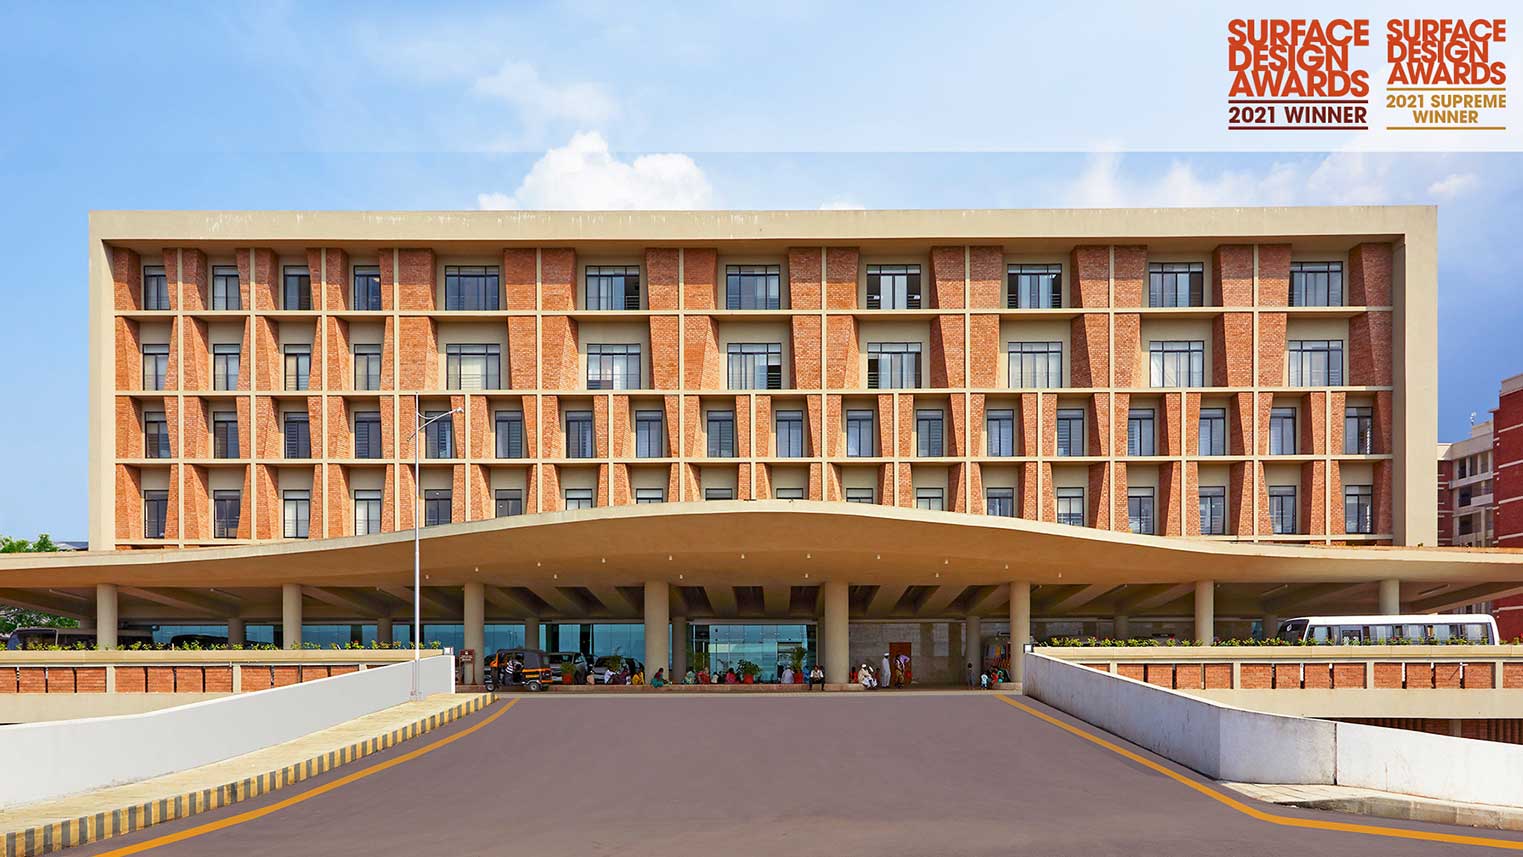 symbiosis university hospital and research centre (suhrc) pune